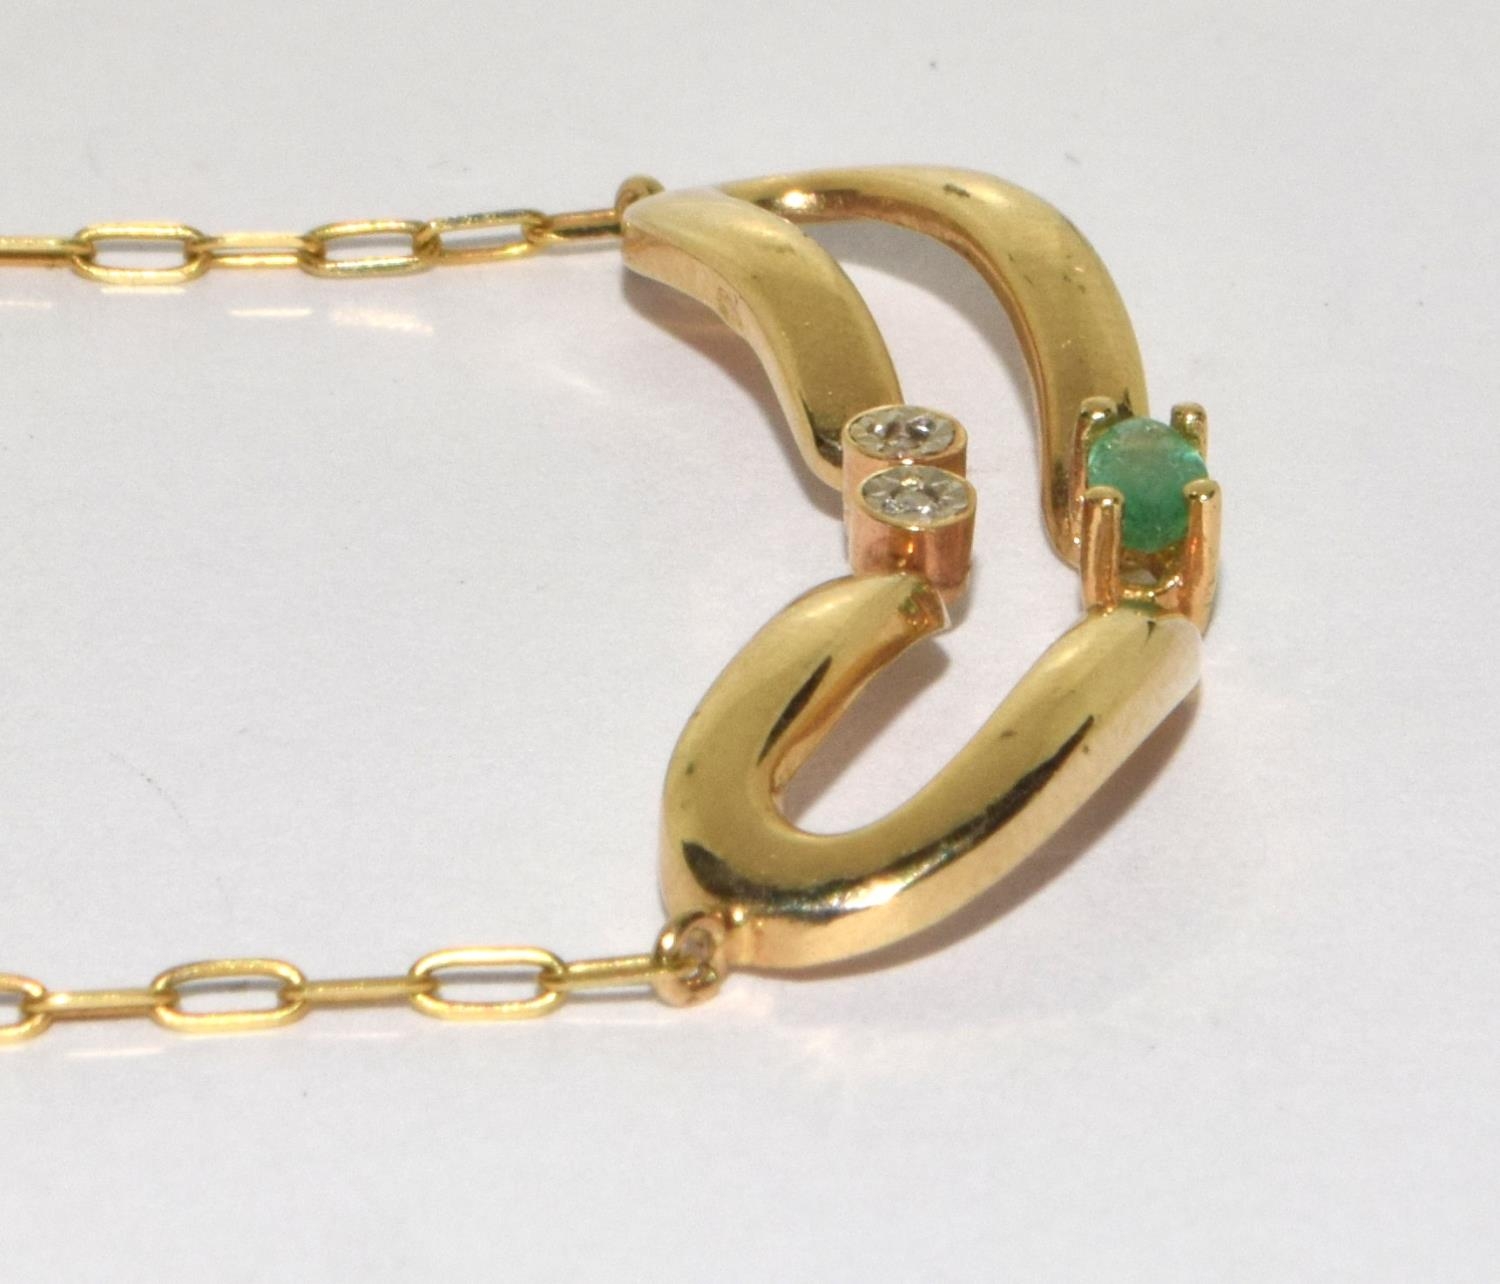 9ct gold diamond and Emerald wish bone pendant on a 14ct gold chain - Image 2 of 6